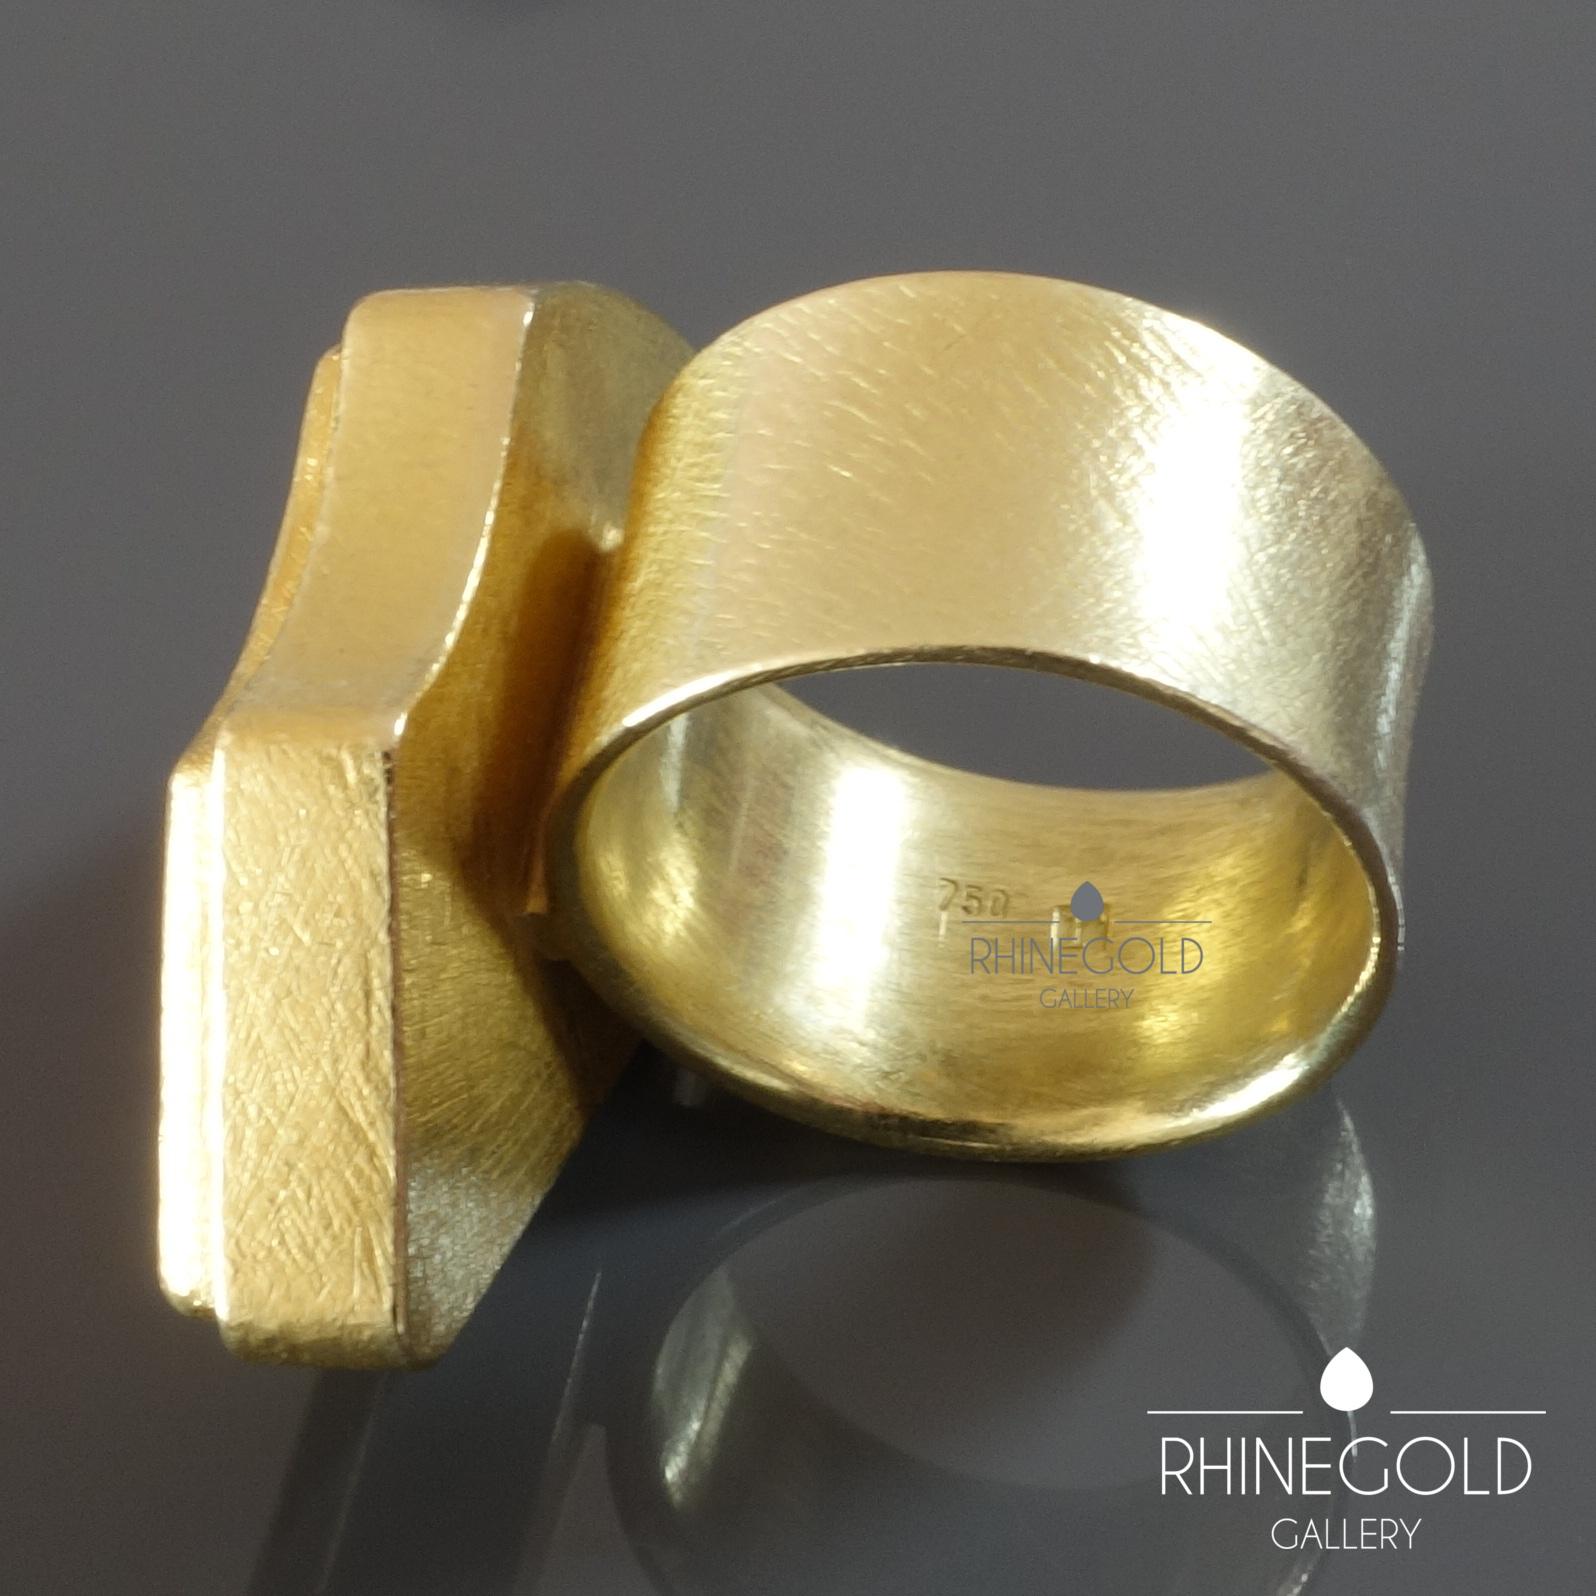 1990s Post-Modernist Freeform Coral Gold Ring
18k yellow gold, natural coral
Ring head 3.4 cm by 1.9 cm (approx. 1 5/16” by ¾”)
Ring size: Ø  17.2 mm = EU 54 / US 6 3/4 / ASIA 13.5
Width of ring band 0.95 cm to 1.1 cm (approx. 3/8” to 7/16”)
Weight